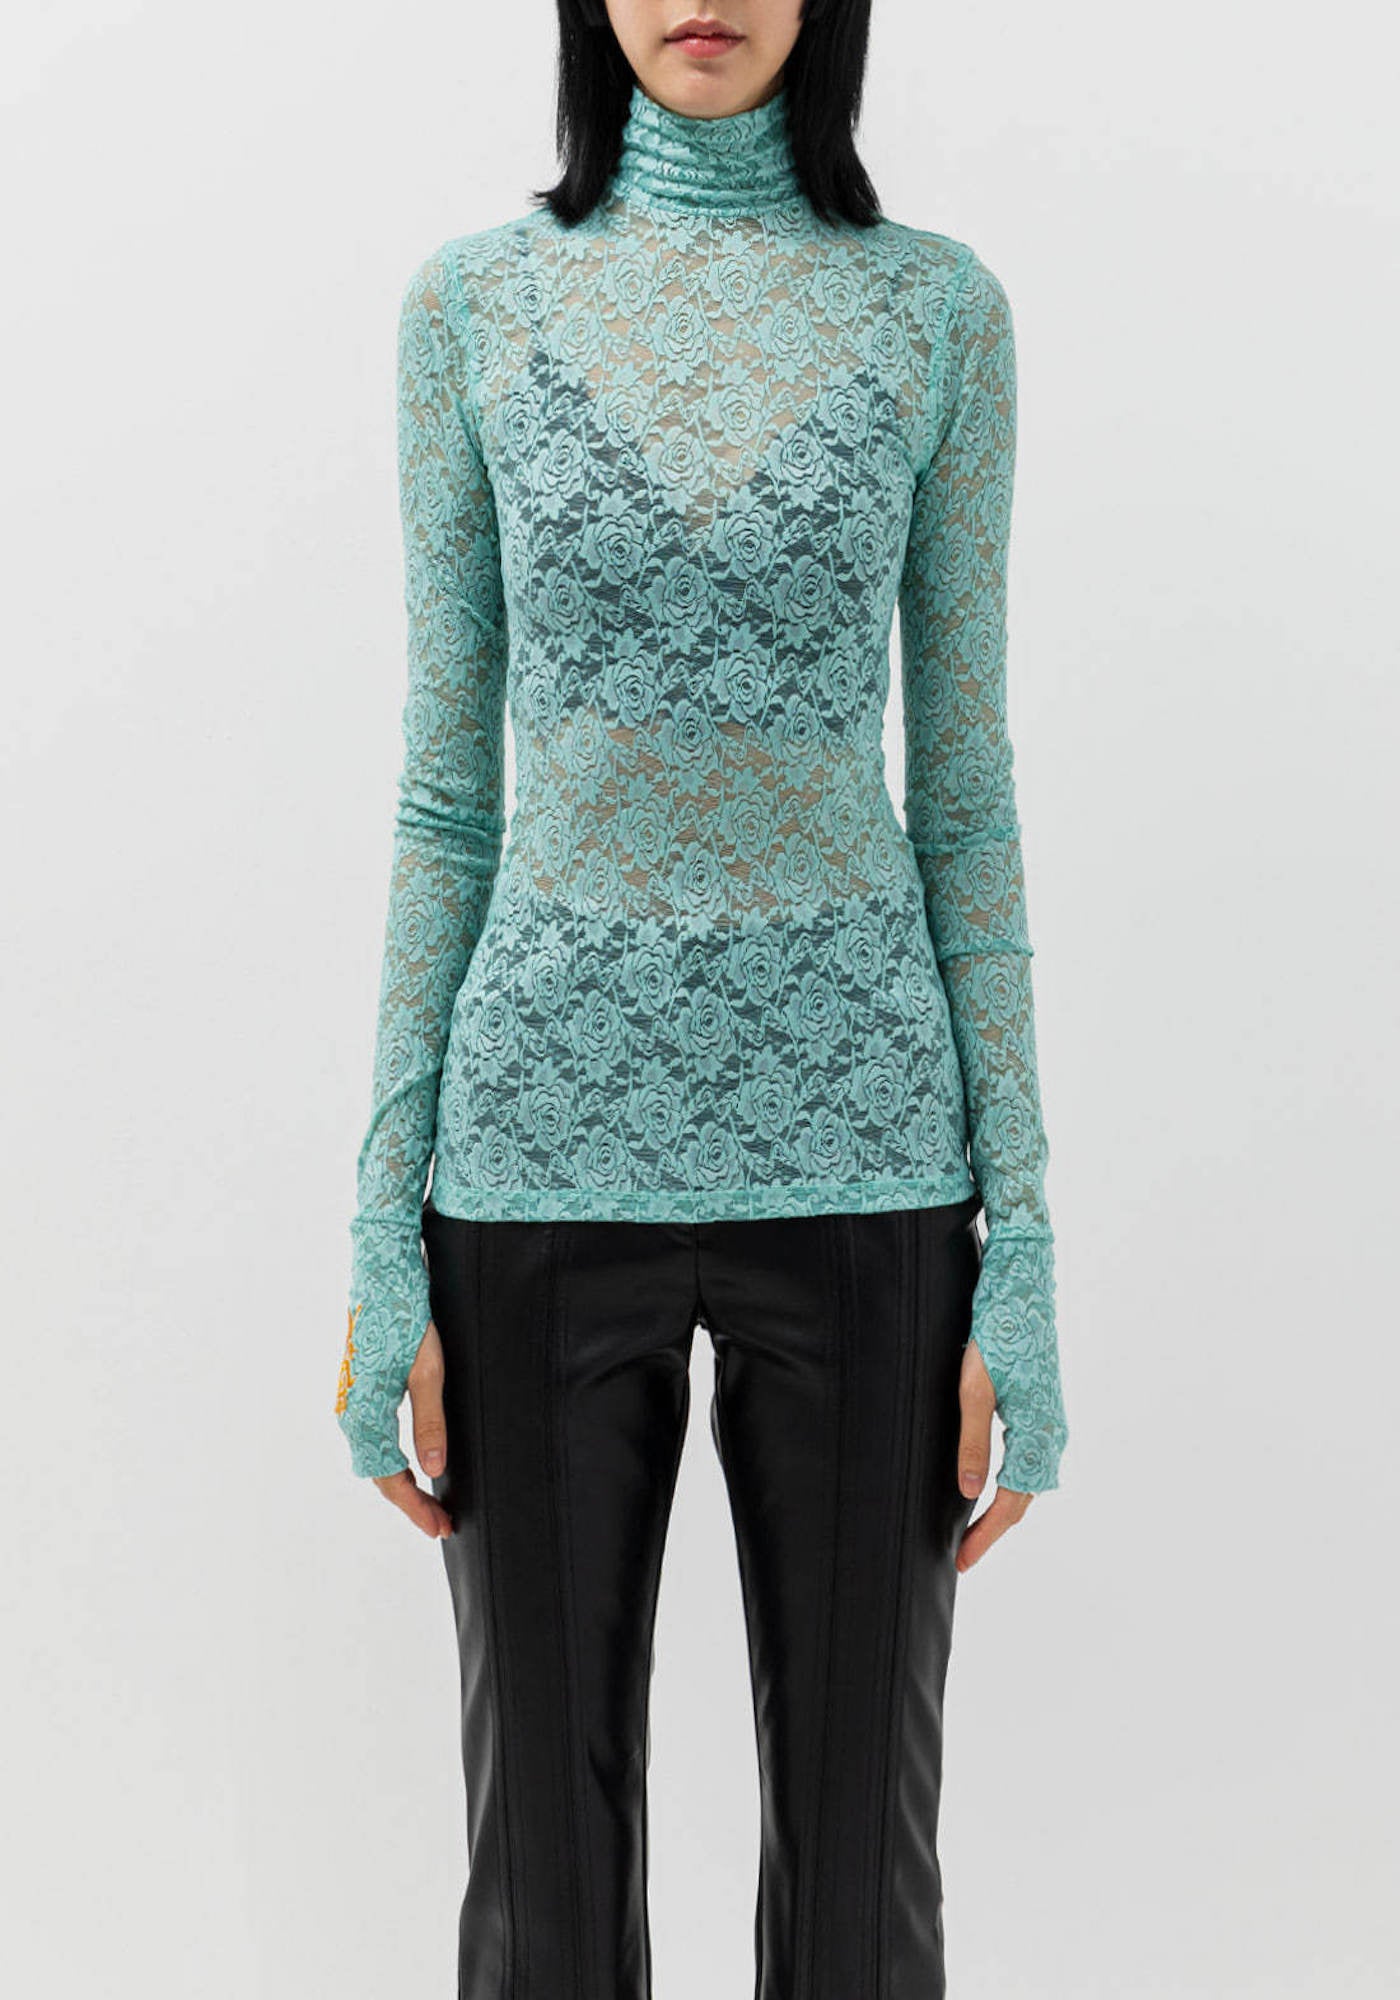 ROSE LACE TOP IN MINT